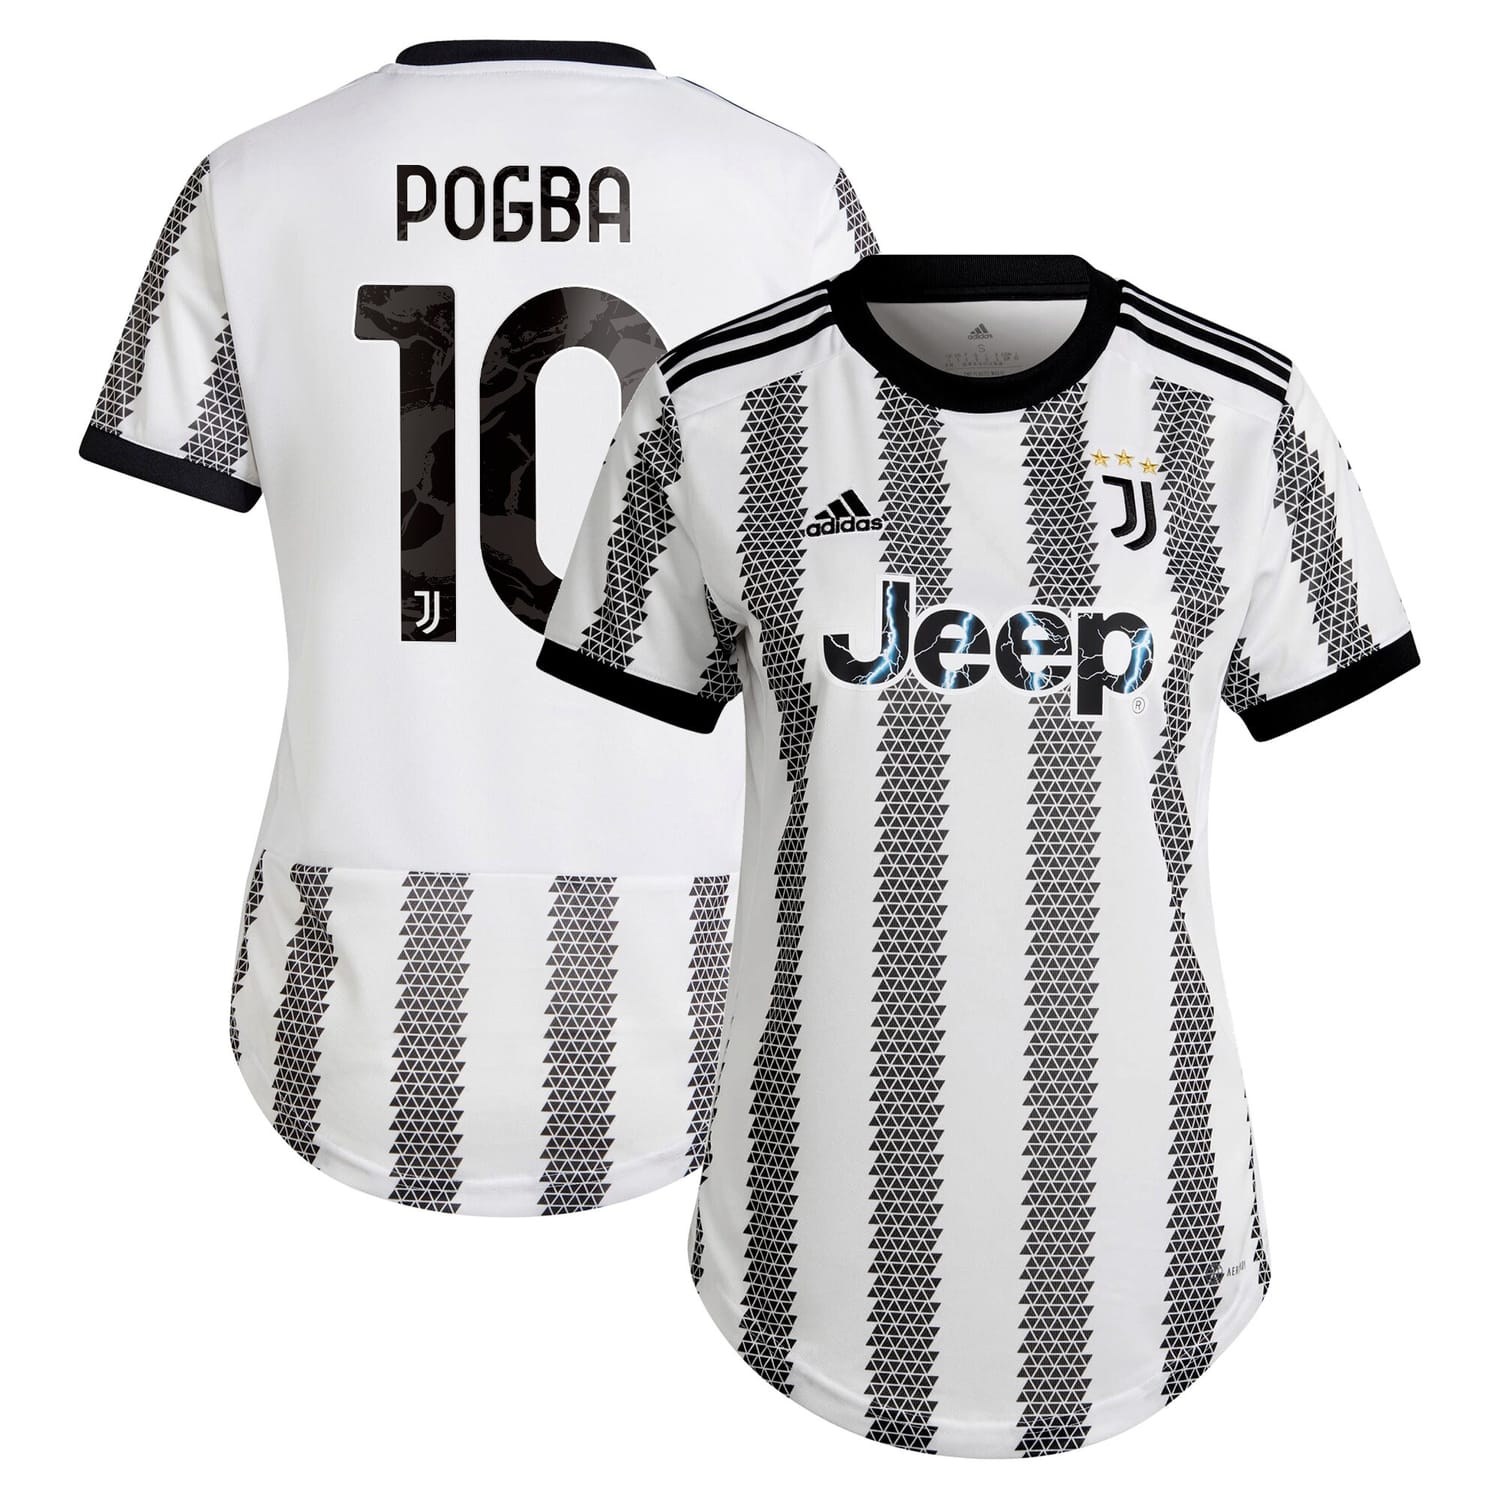 Serie A Juventus Home Jersey Shirt 2022-23 player Paul Pogba 10 printing for Women